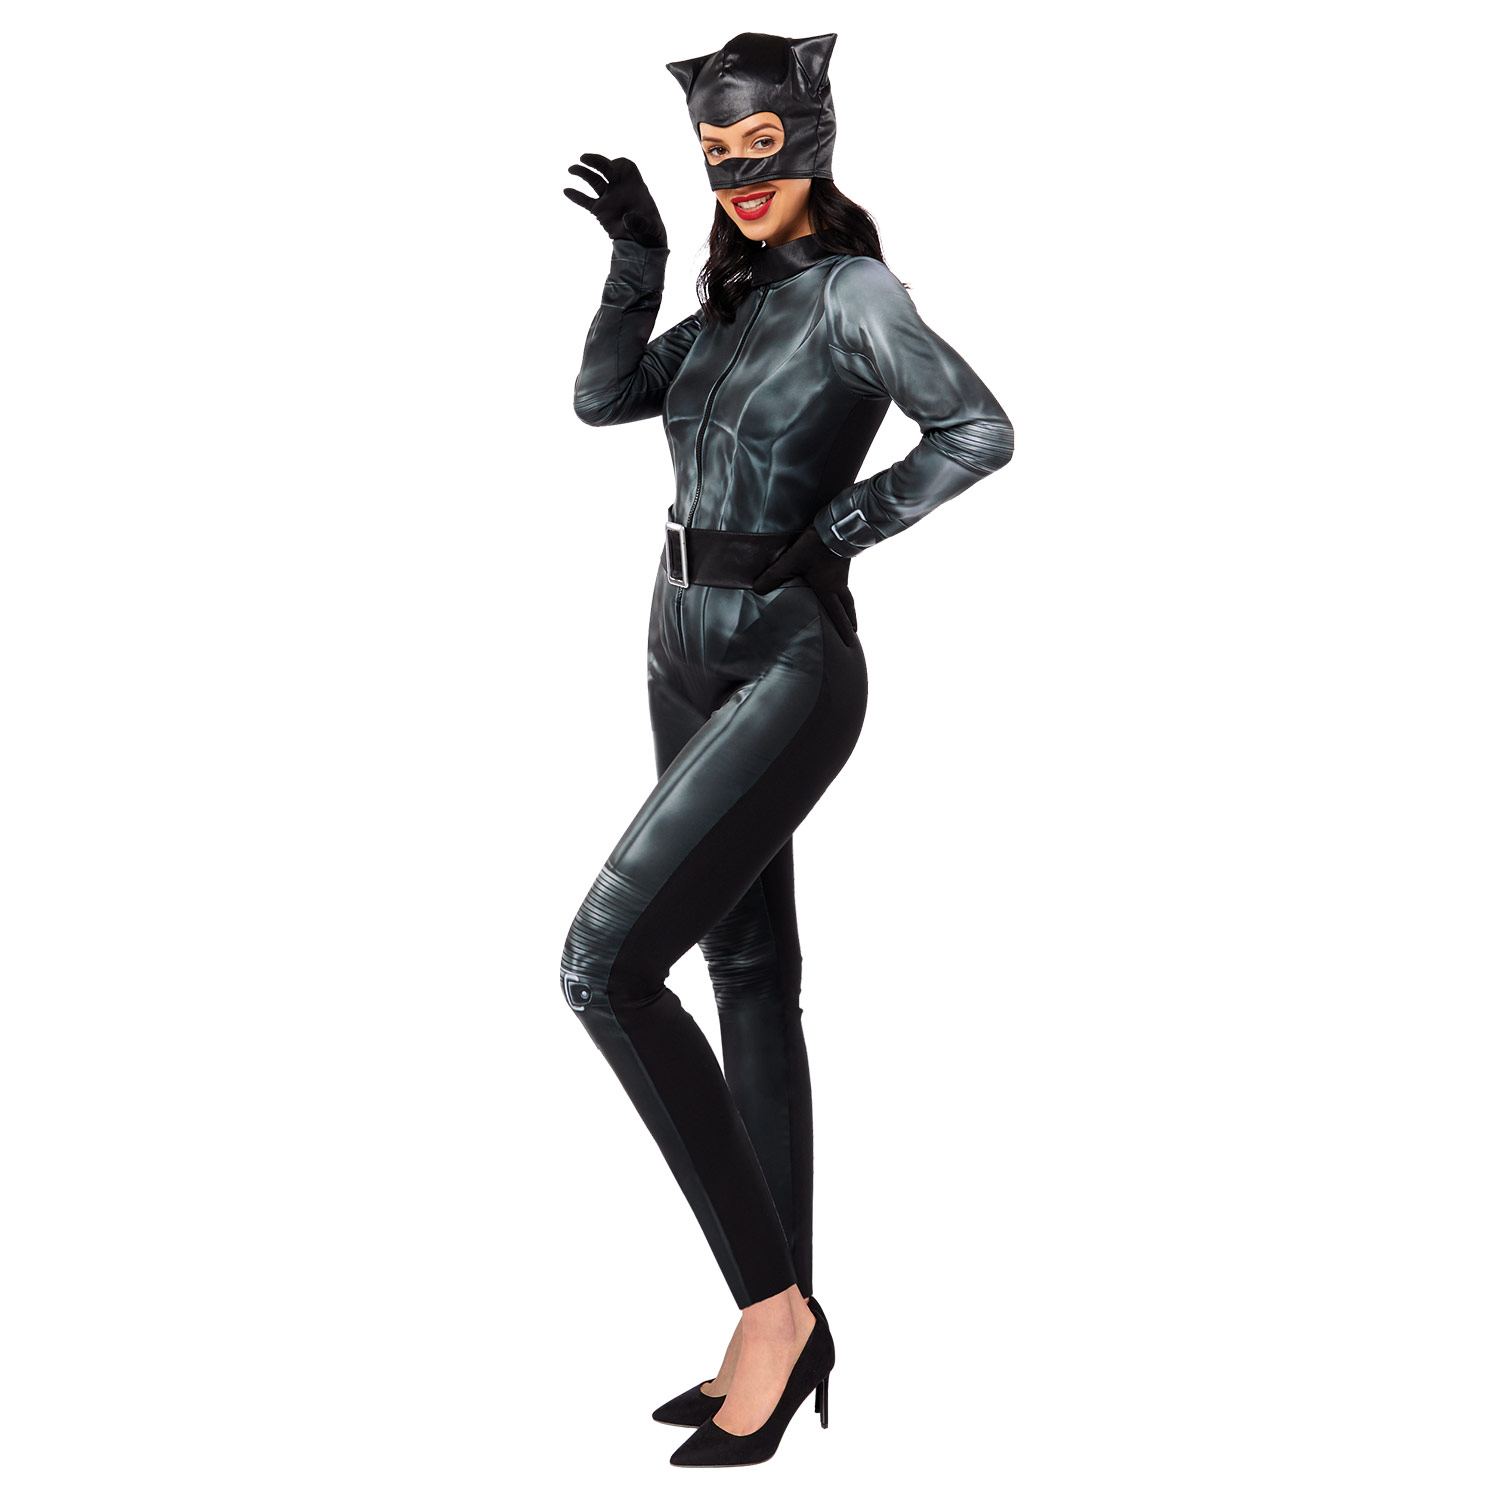 Catwoman Movie Costume Size 12-14 - 1 PC Amscan